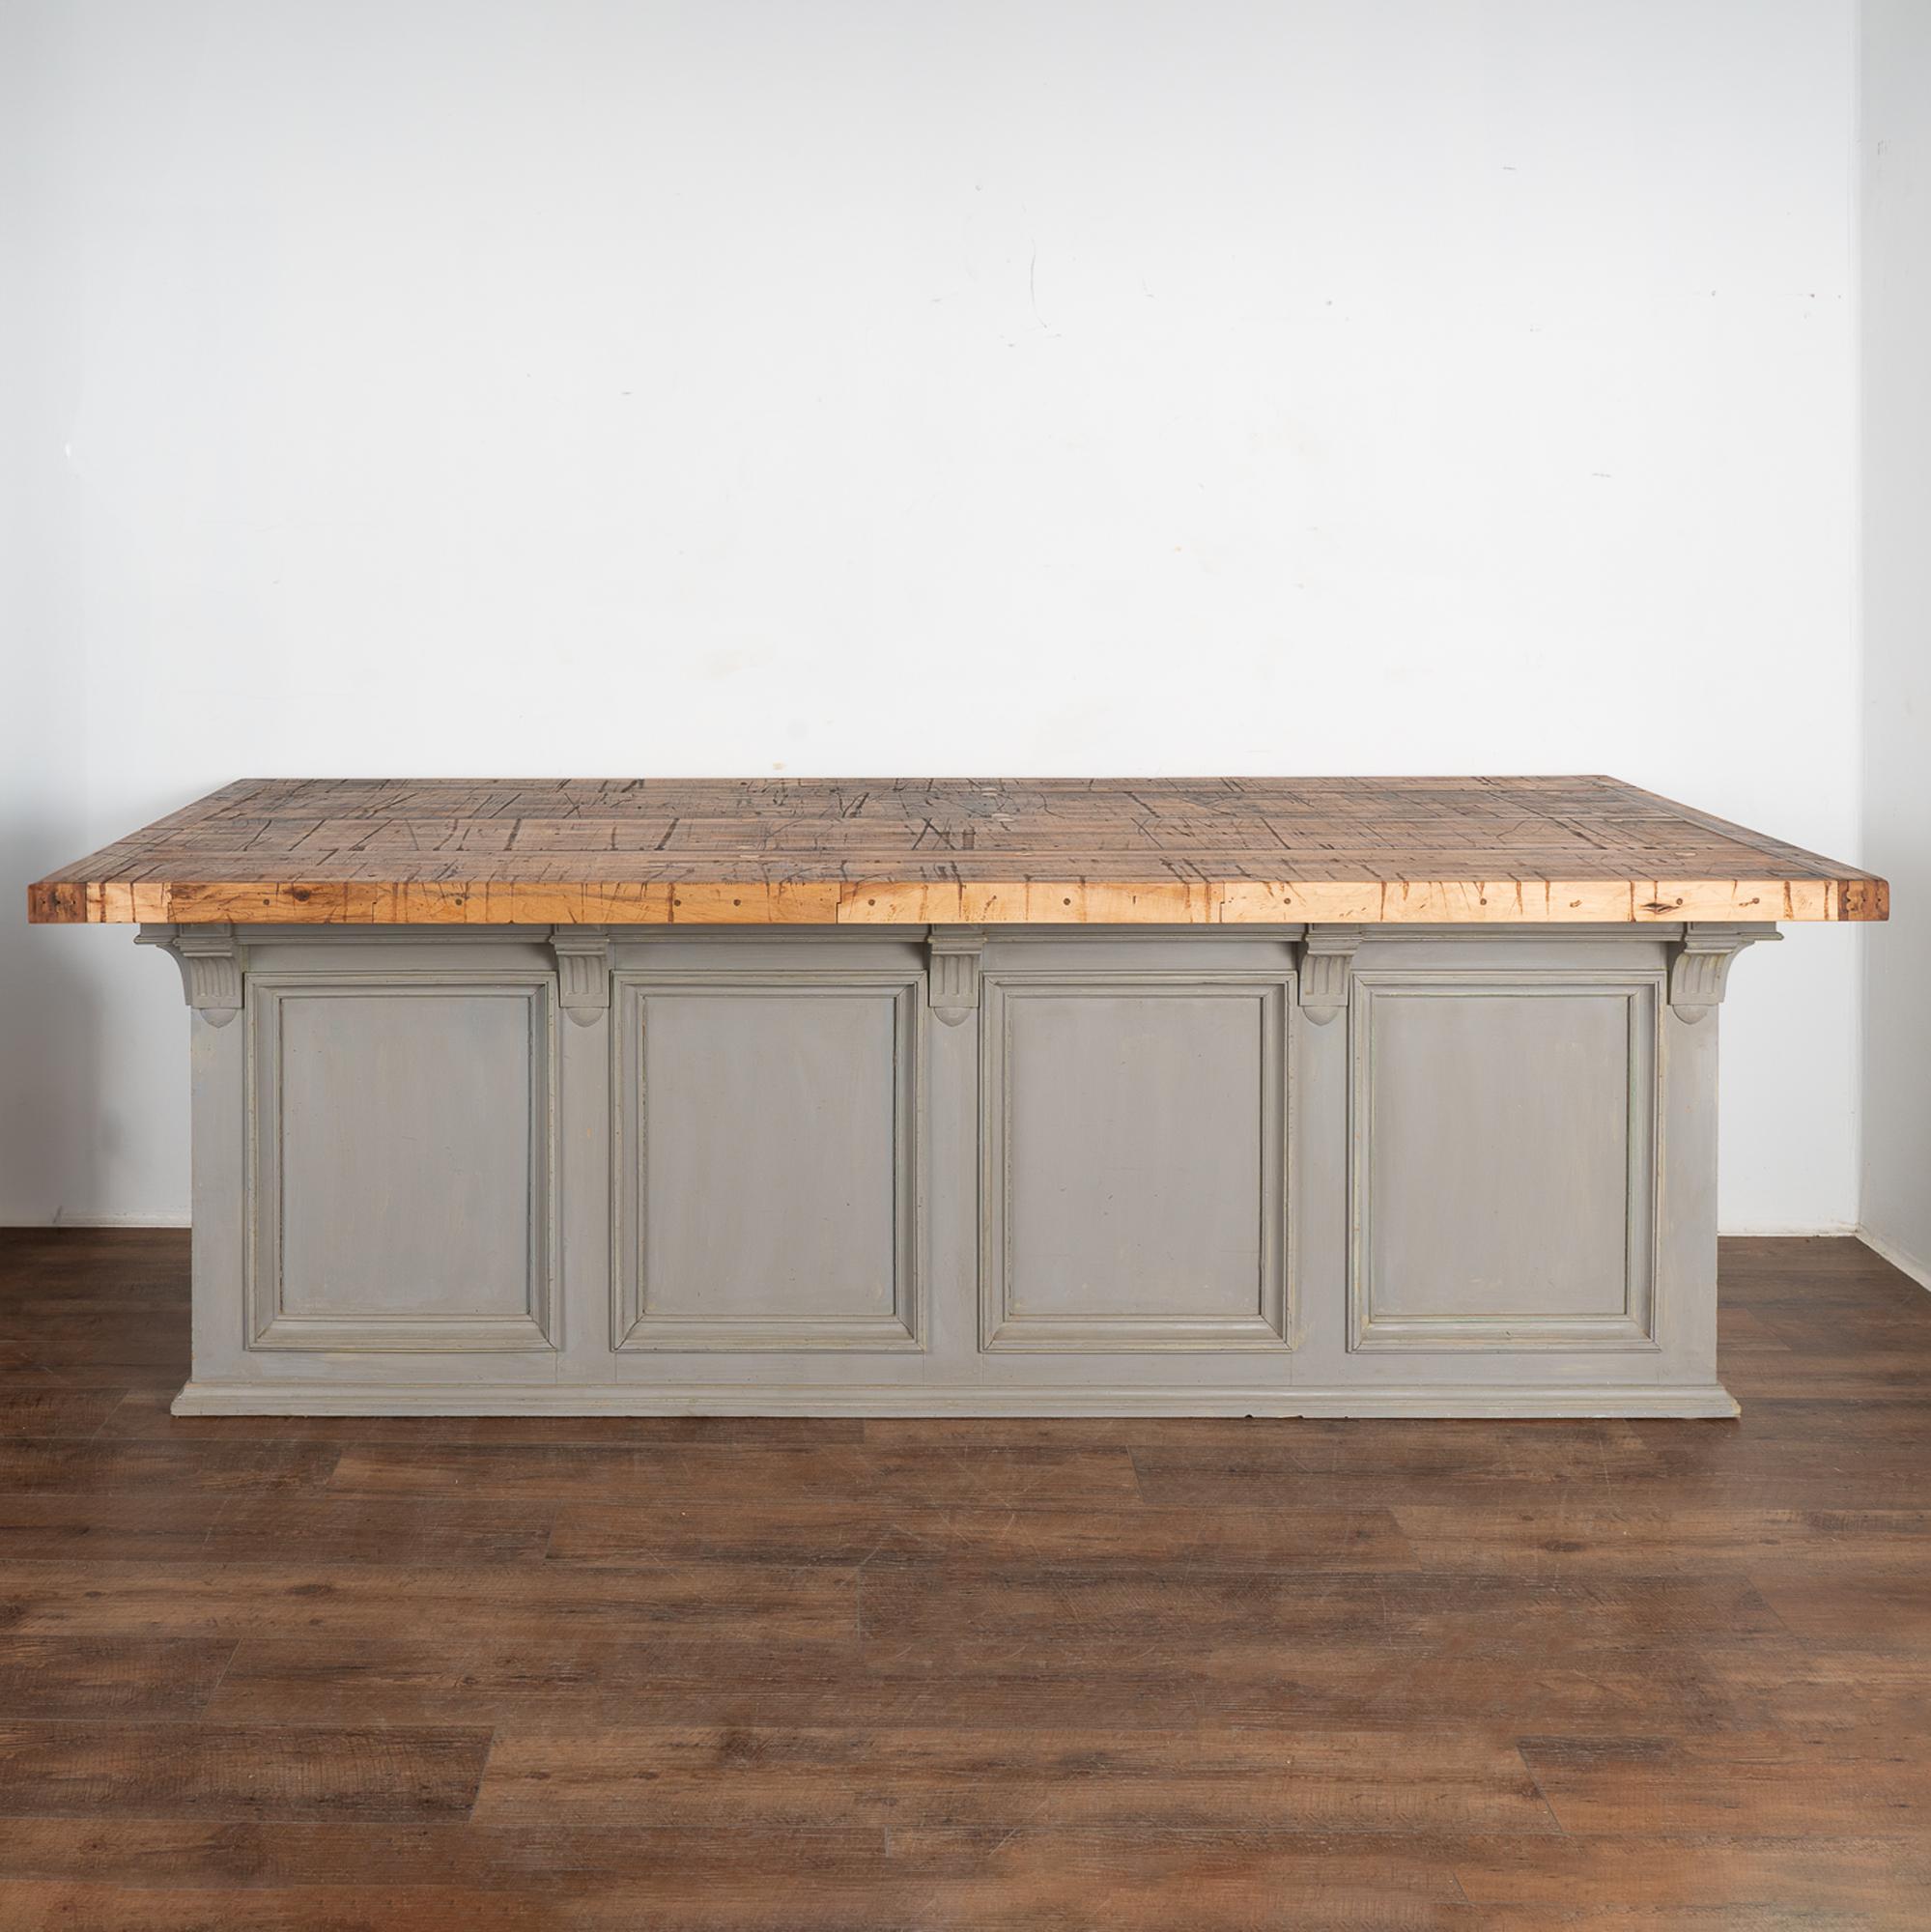 French Free Standing Gray Kitchen Island Shop Counter from France, circa 1860-80